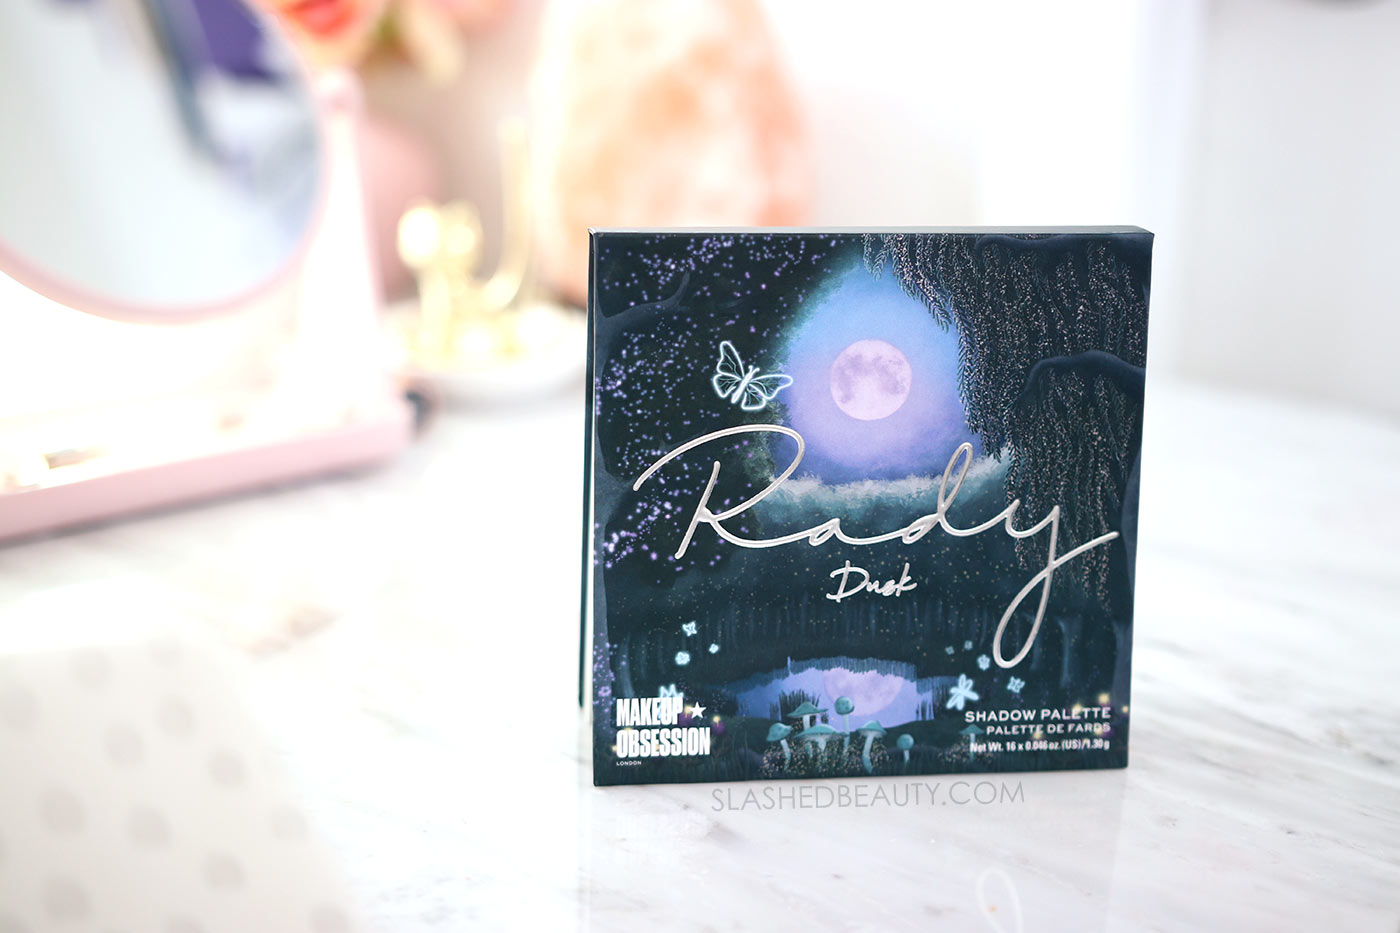 Makeup Obsession x Rady Dusk Shadow Palette Swatches & Review | Affordable Eyeshadow Palette for Fall | Slashed Beauty